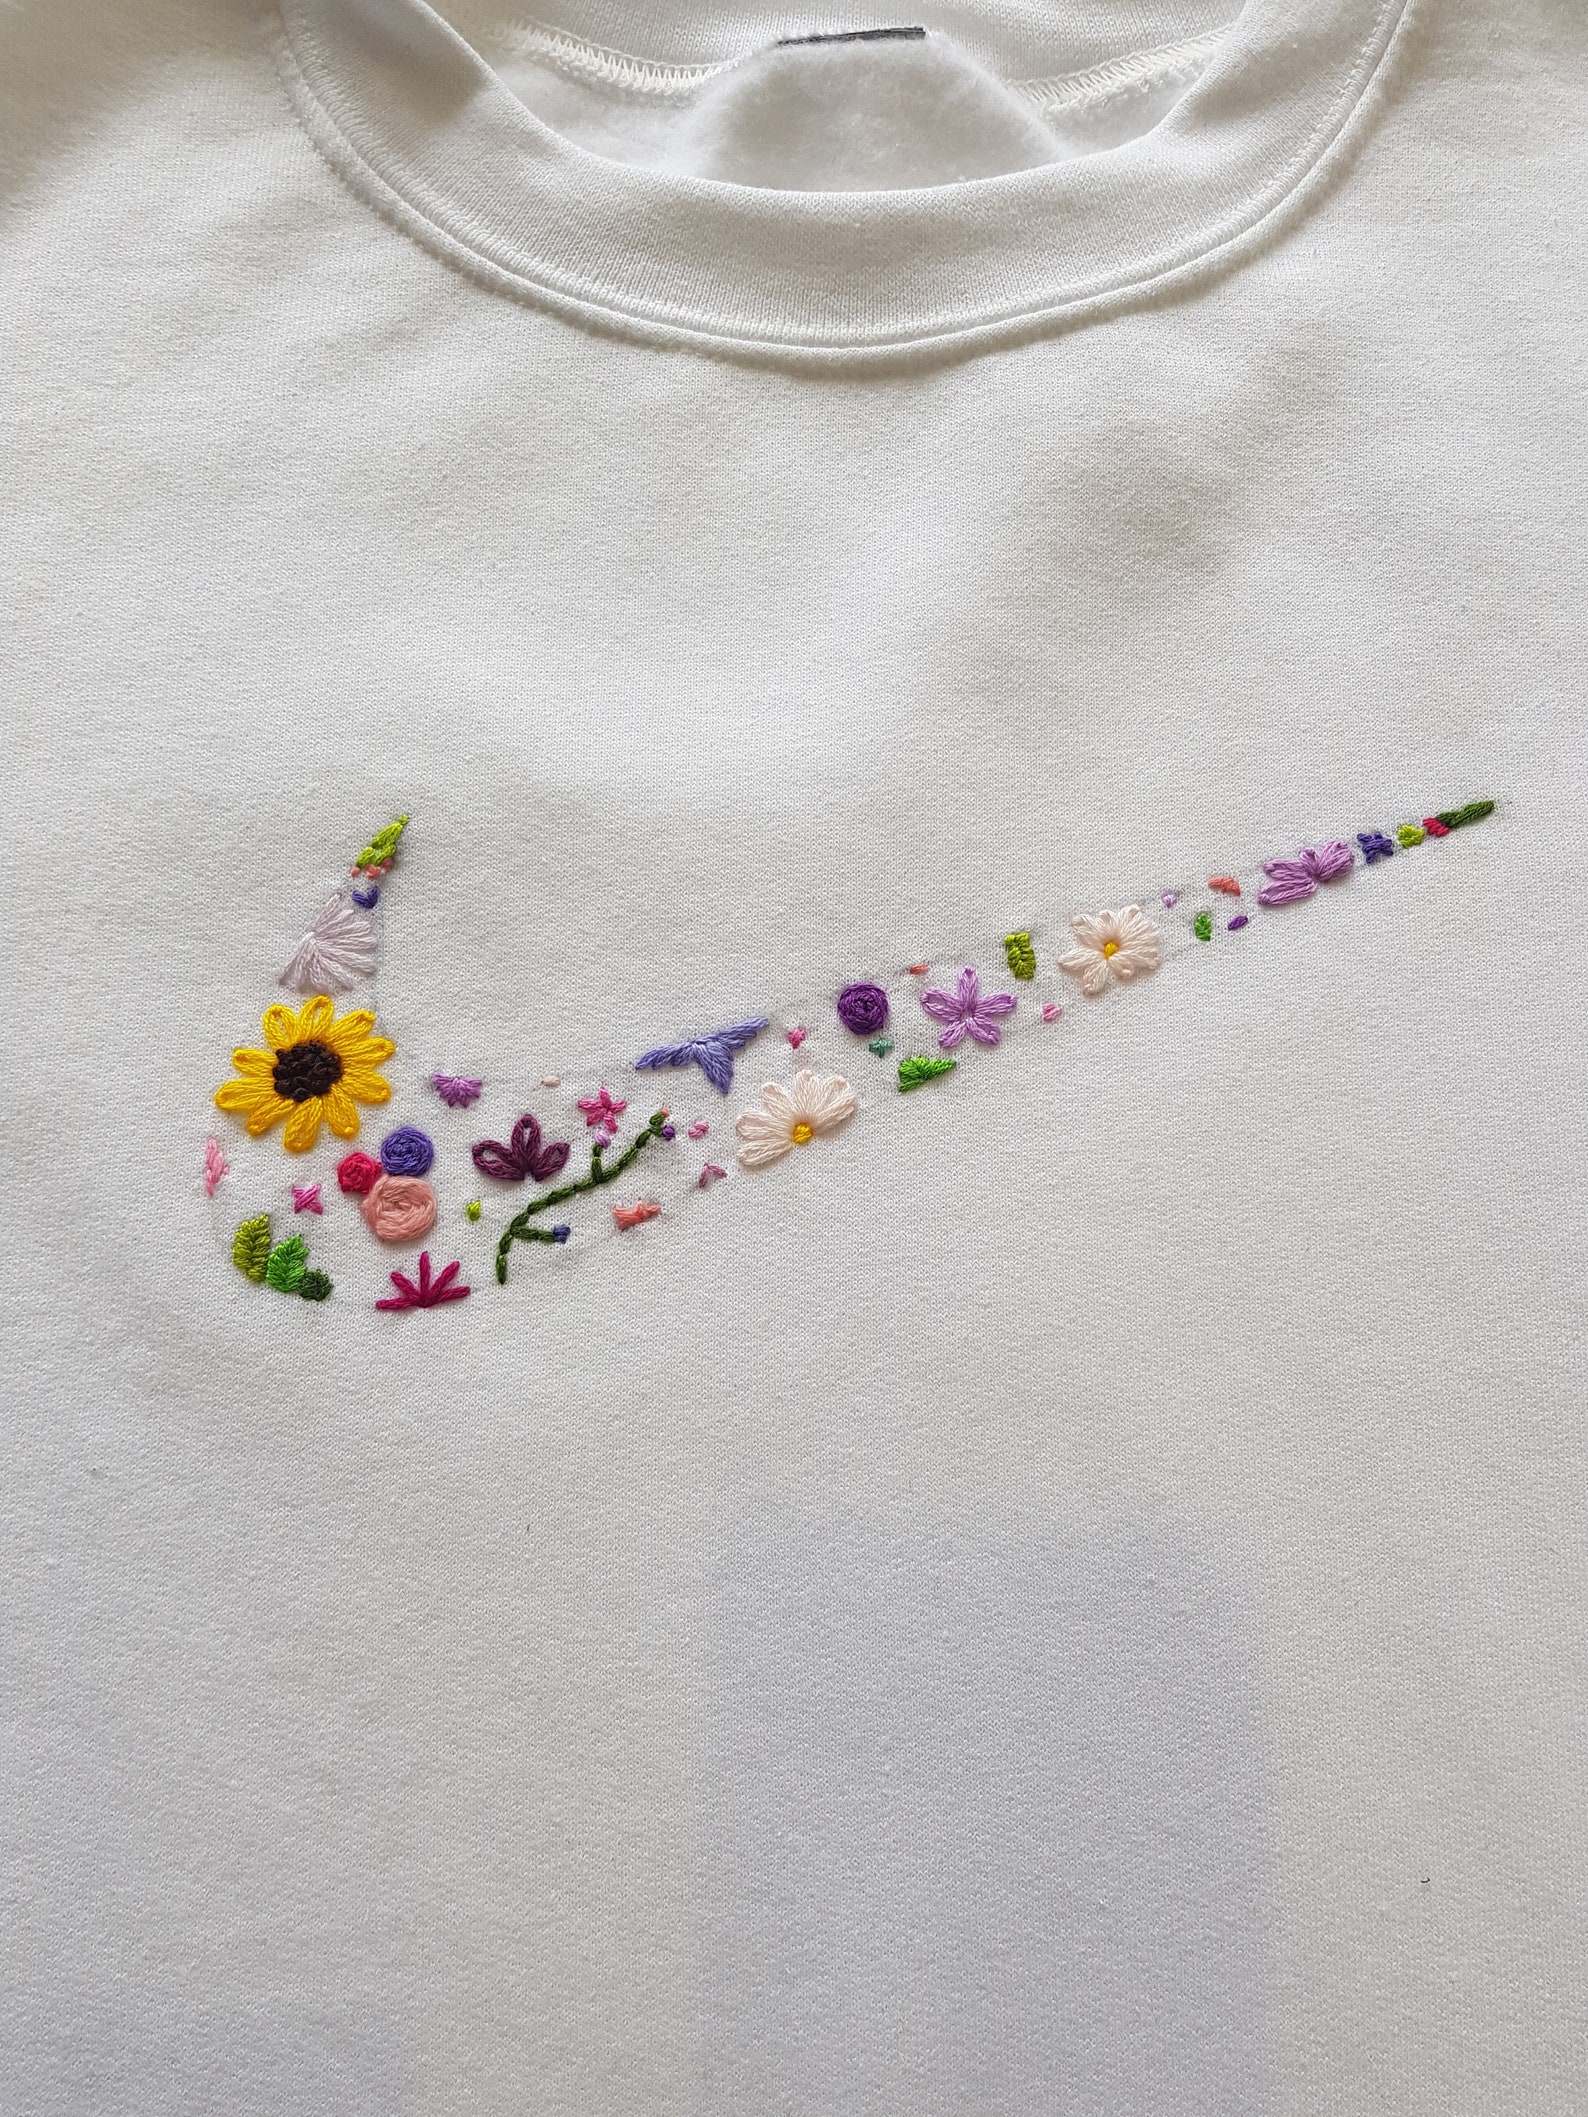 Hand Embroidered Floral Nike Tick Sweatshirt | Etsy